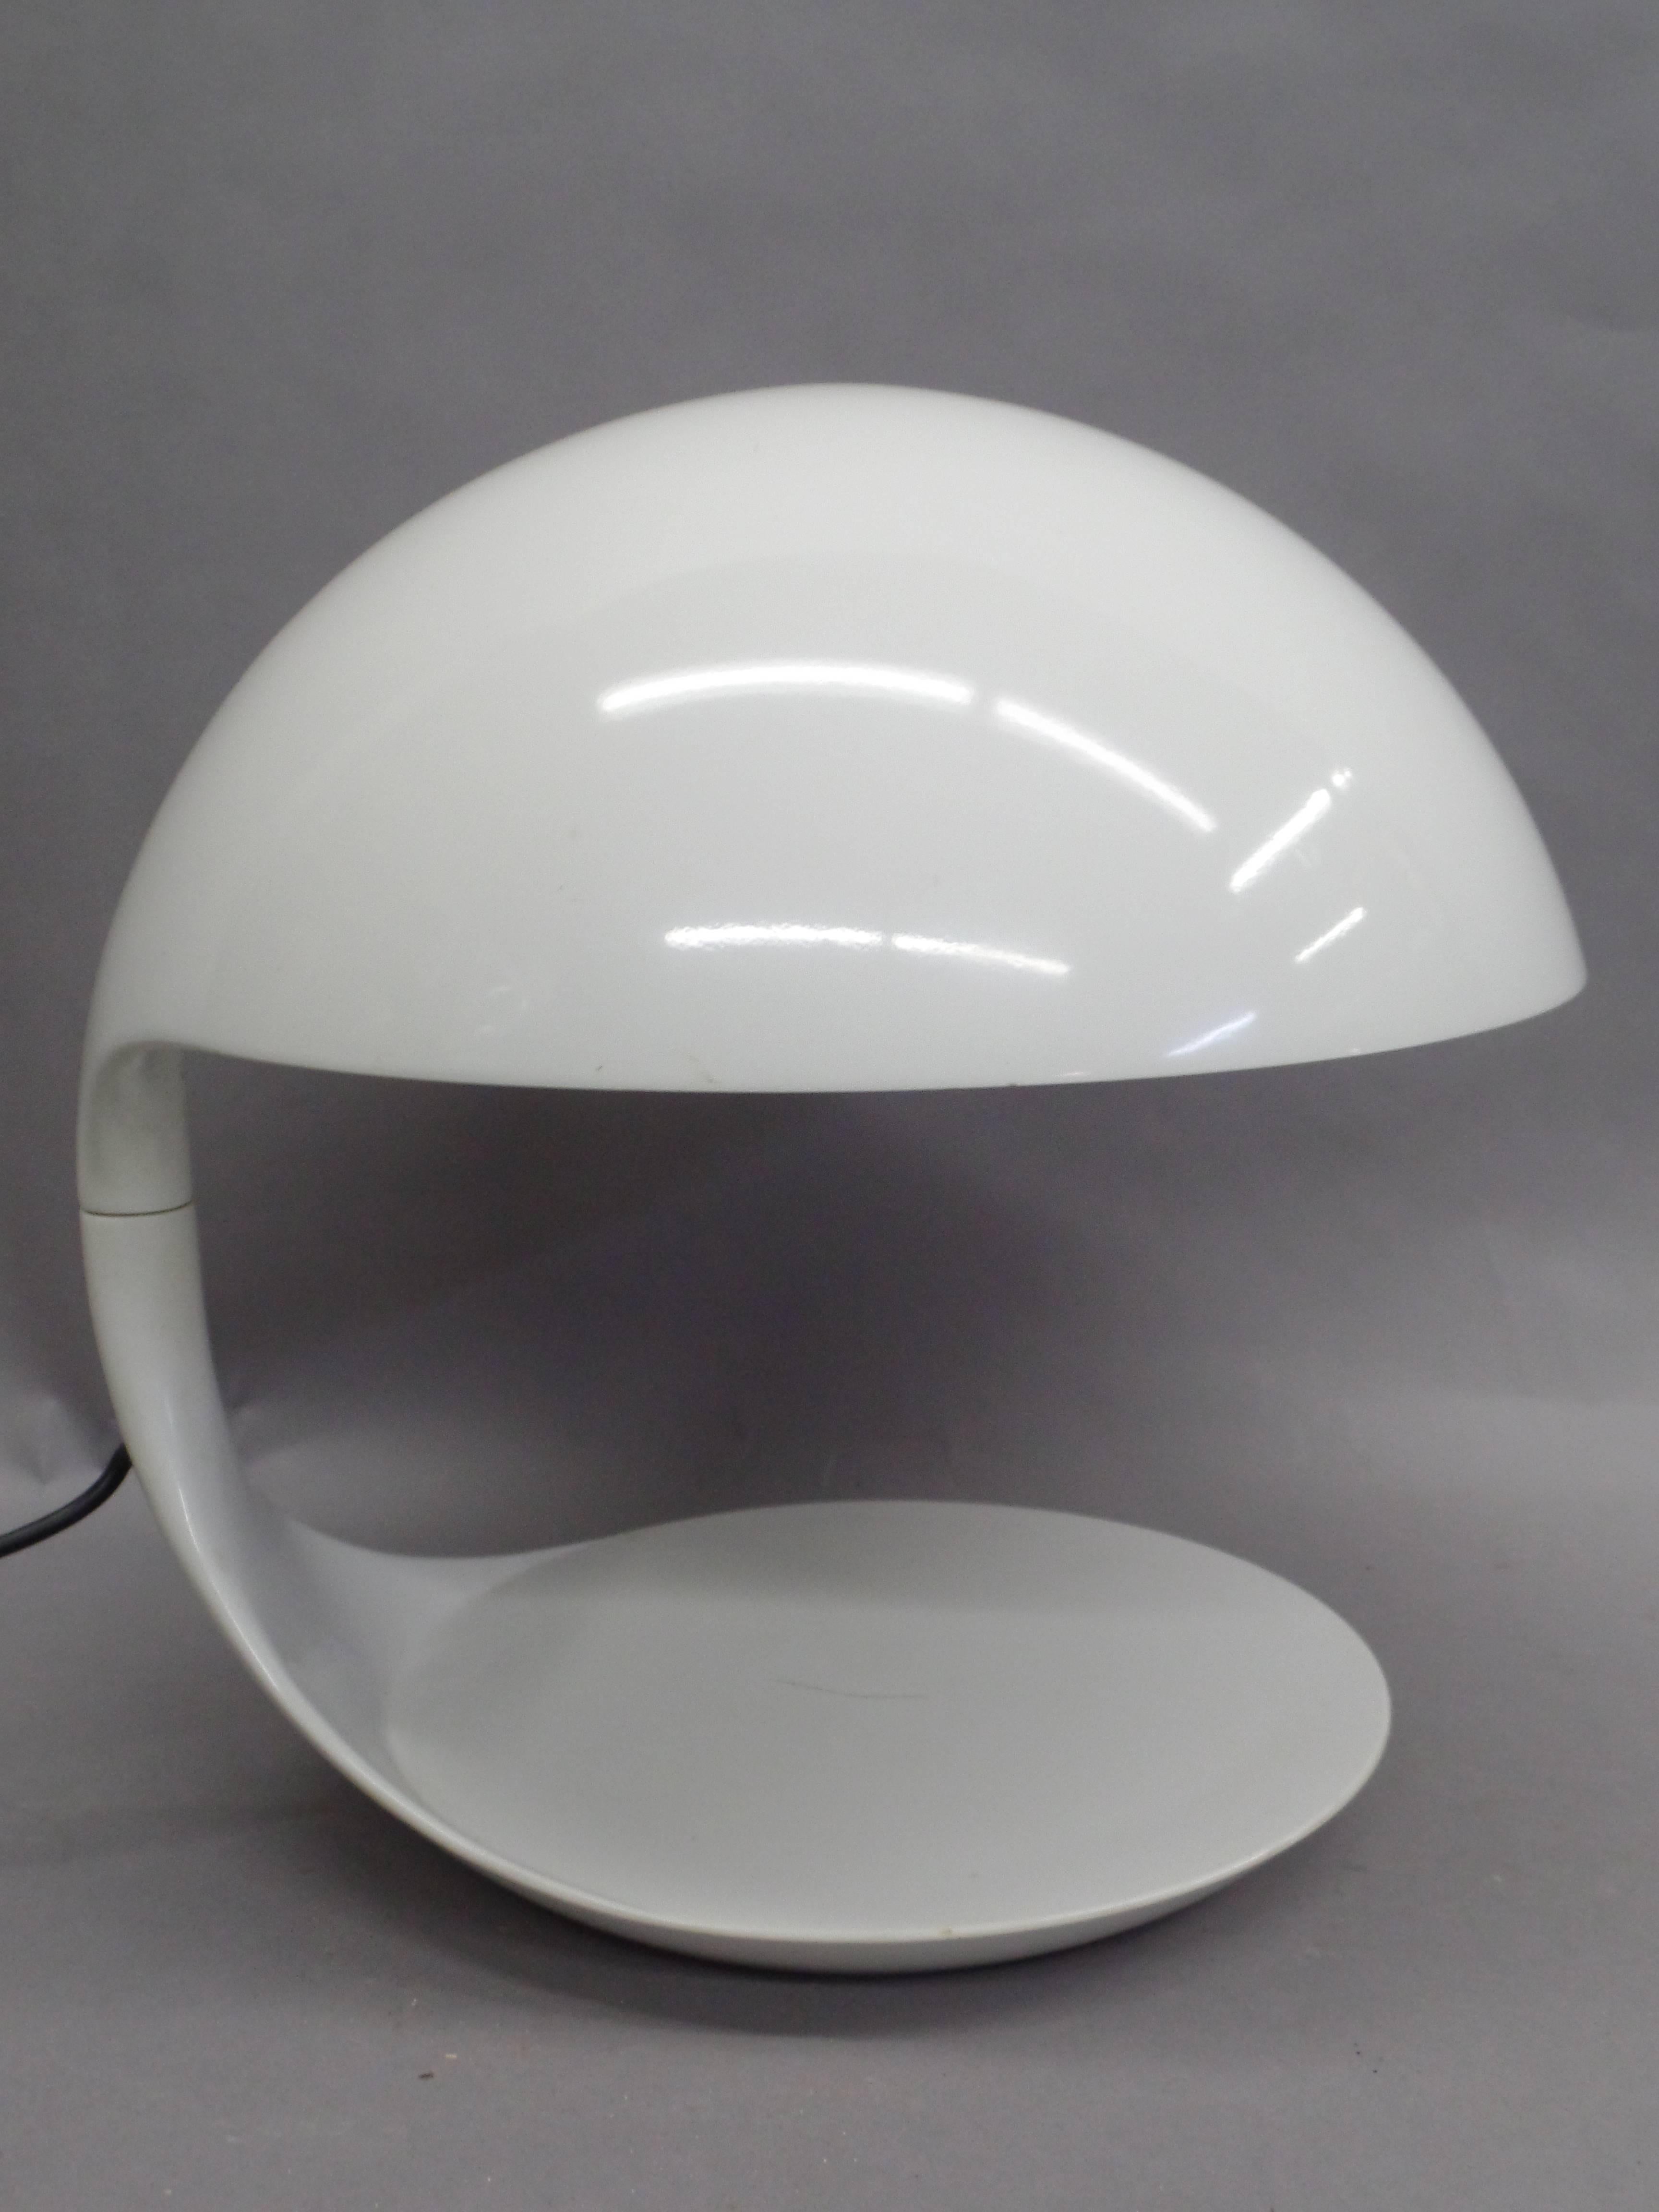 Important Italian Space Age / Mid-Century Modern Cobra table or desk lamp by Elio Martinelli for Martinelli Luce which pivots 360 degrees allowing light to be reflected as the user wishes. Martinelli's piece established itself as a design icon in